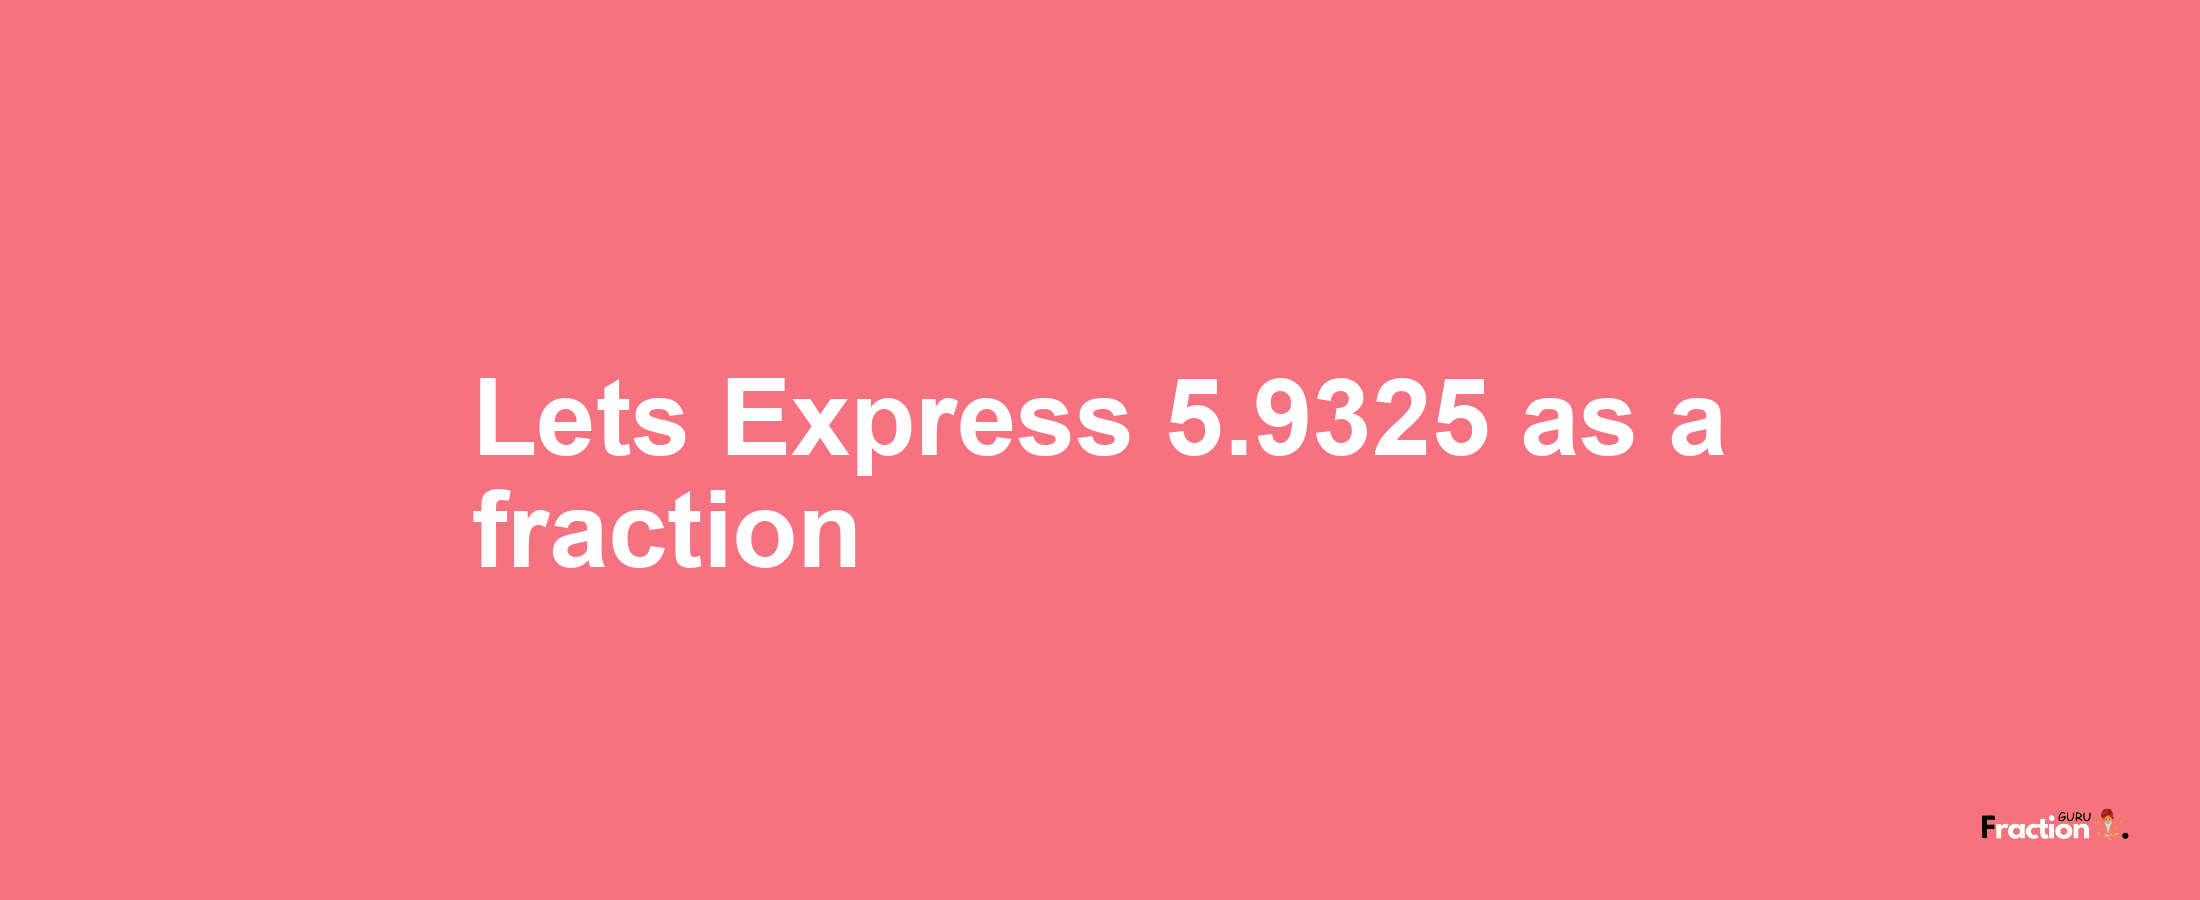 Lets Express 5.9325 as afraction